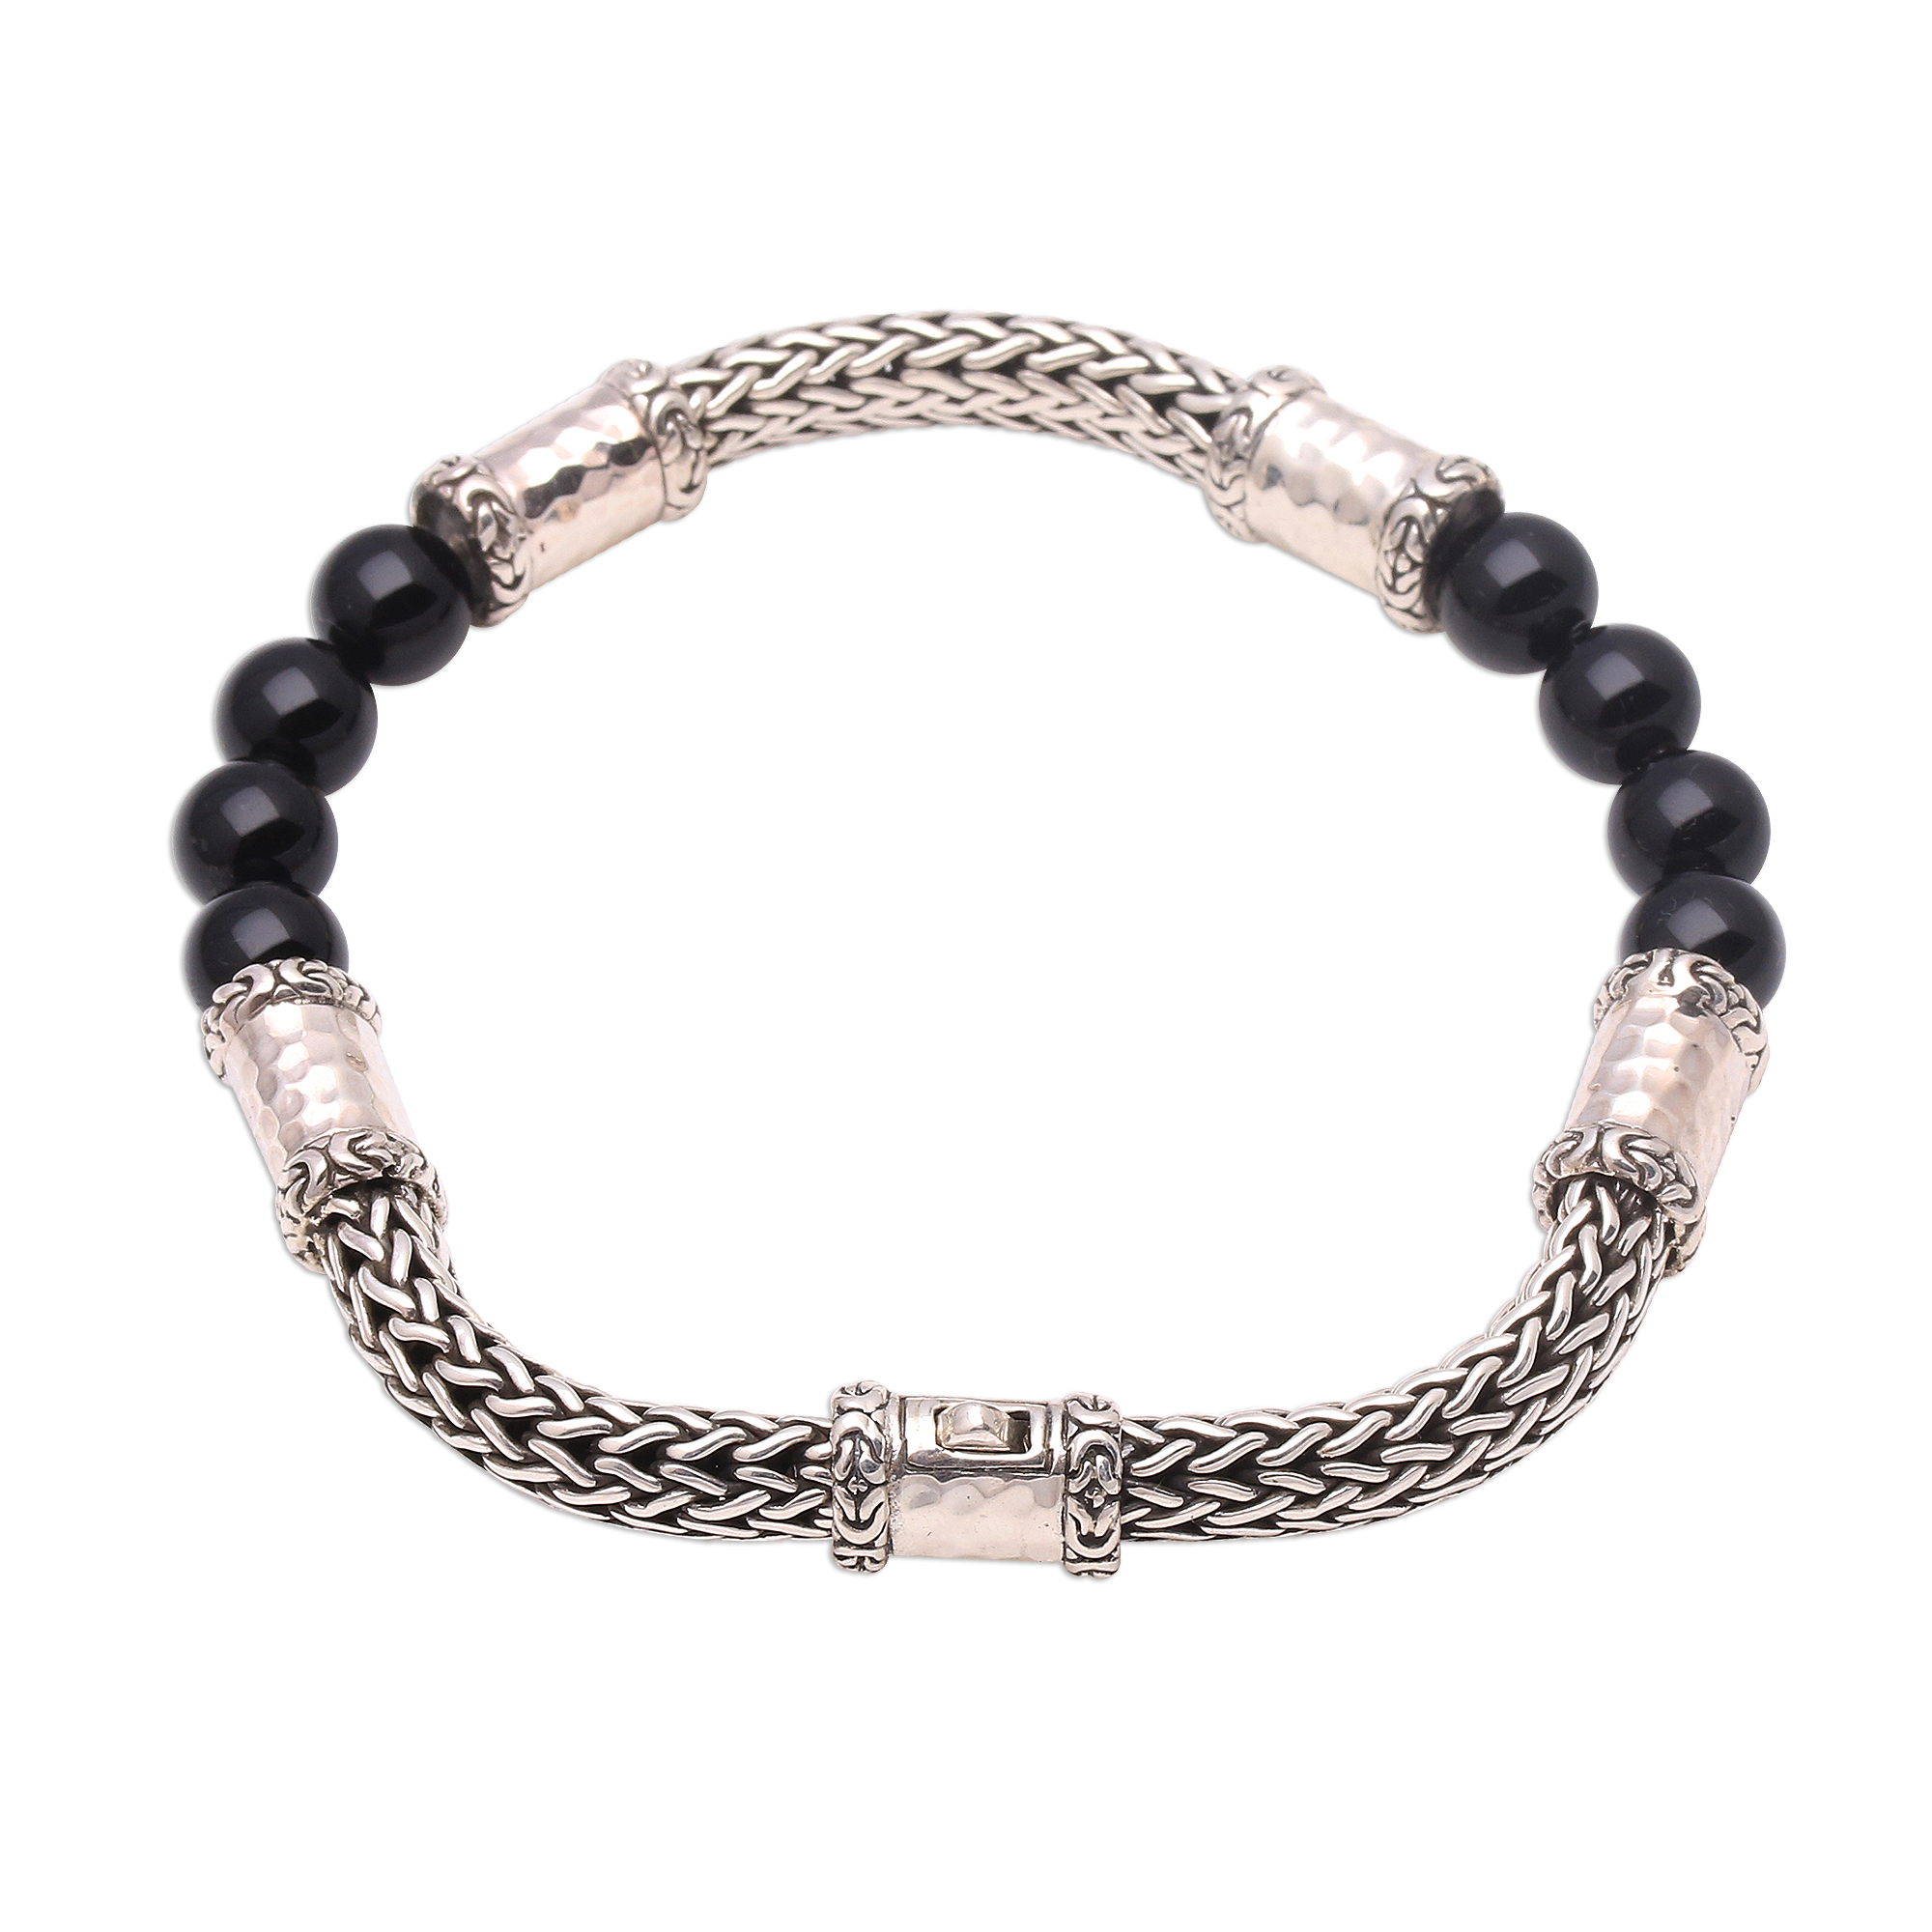 Onyx and Sterling Silver Beaded Chain Bracelet from Bali - Agreeable ...